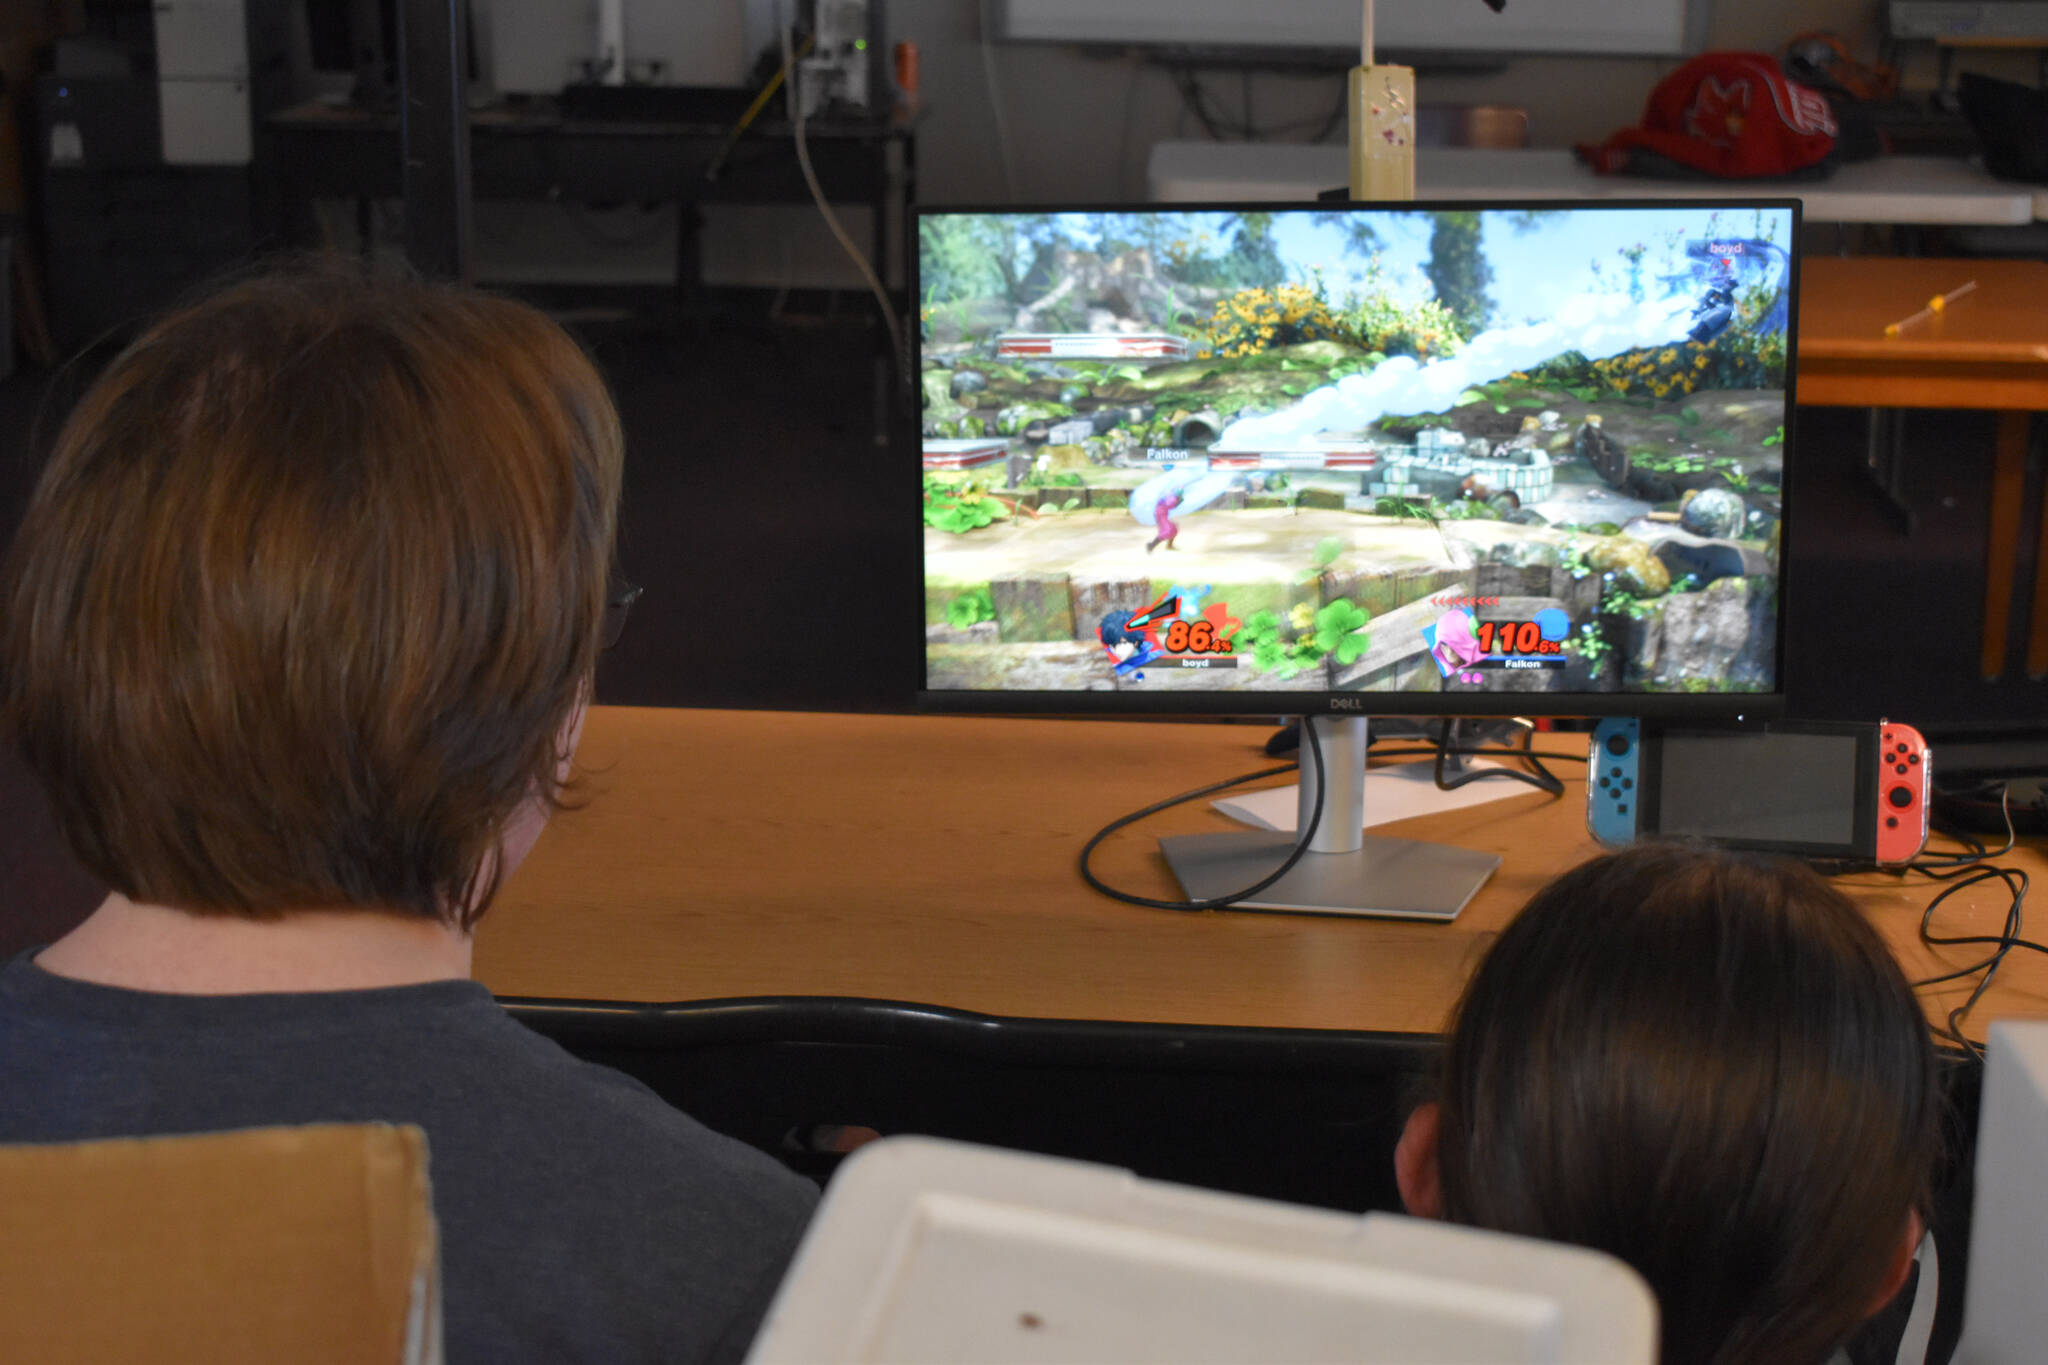 Kenai Central High School esports players participate in a practice match of Super Smash Bros. Ultimate ahead of a scheduled game at Kenai Central High School in Kenai, Alaska, on Wednesday, Feb. 15, 2023. (Jake Dye/Peninsula Clarion)